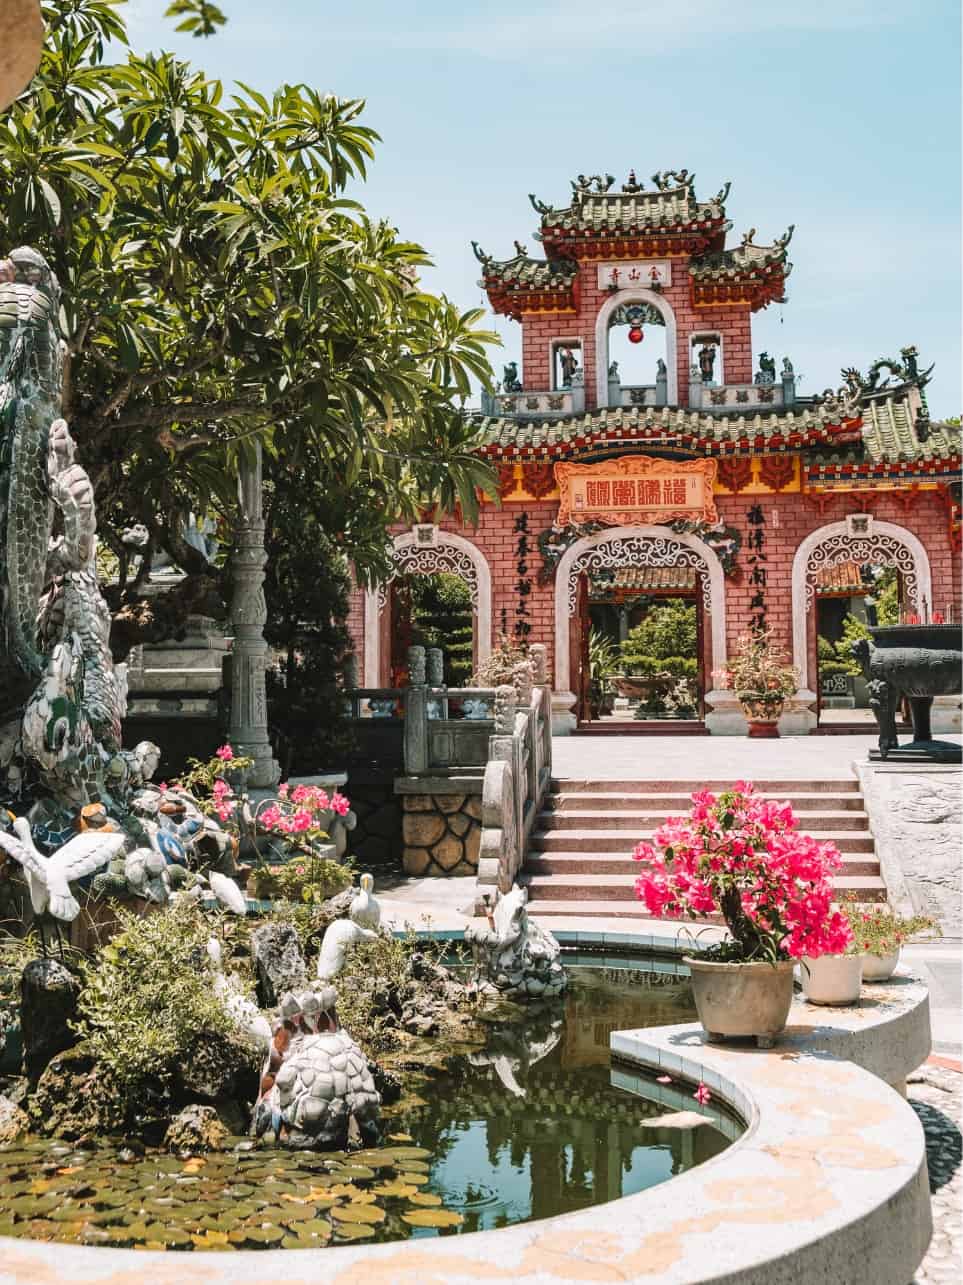 The fountains and front gate of the Phuc Kien Assembly Hall in Hoi An Vietnam. 